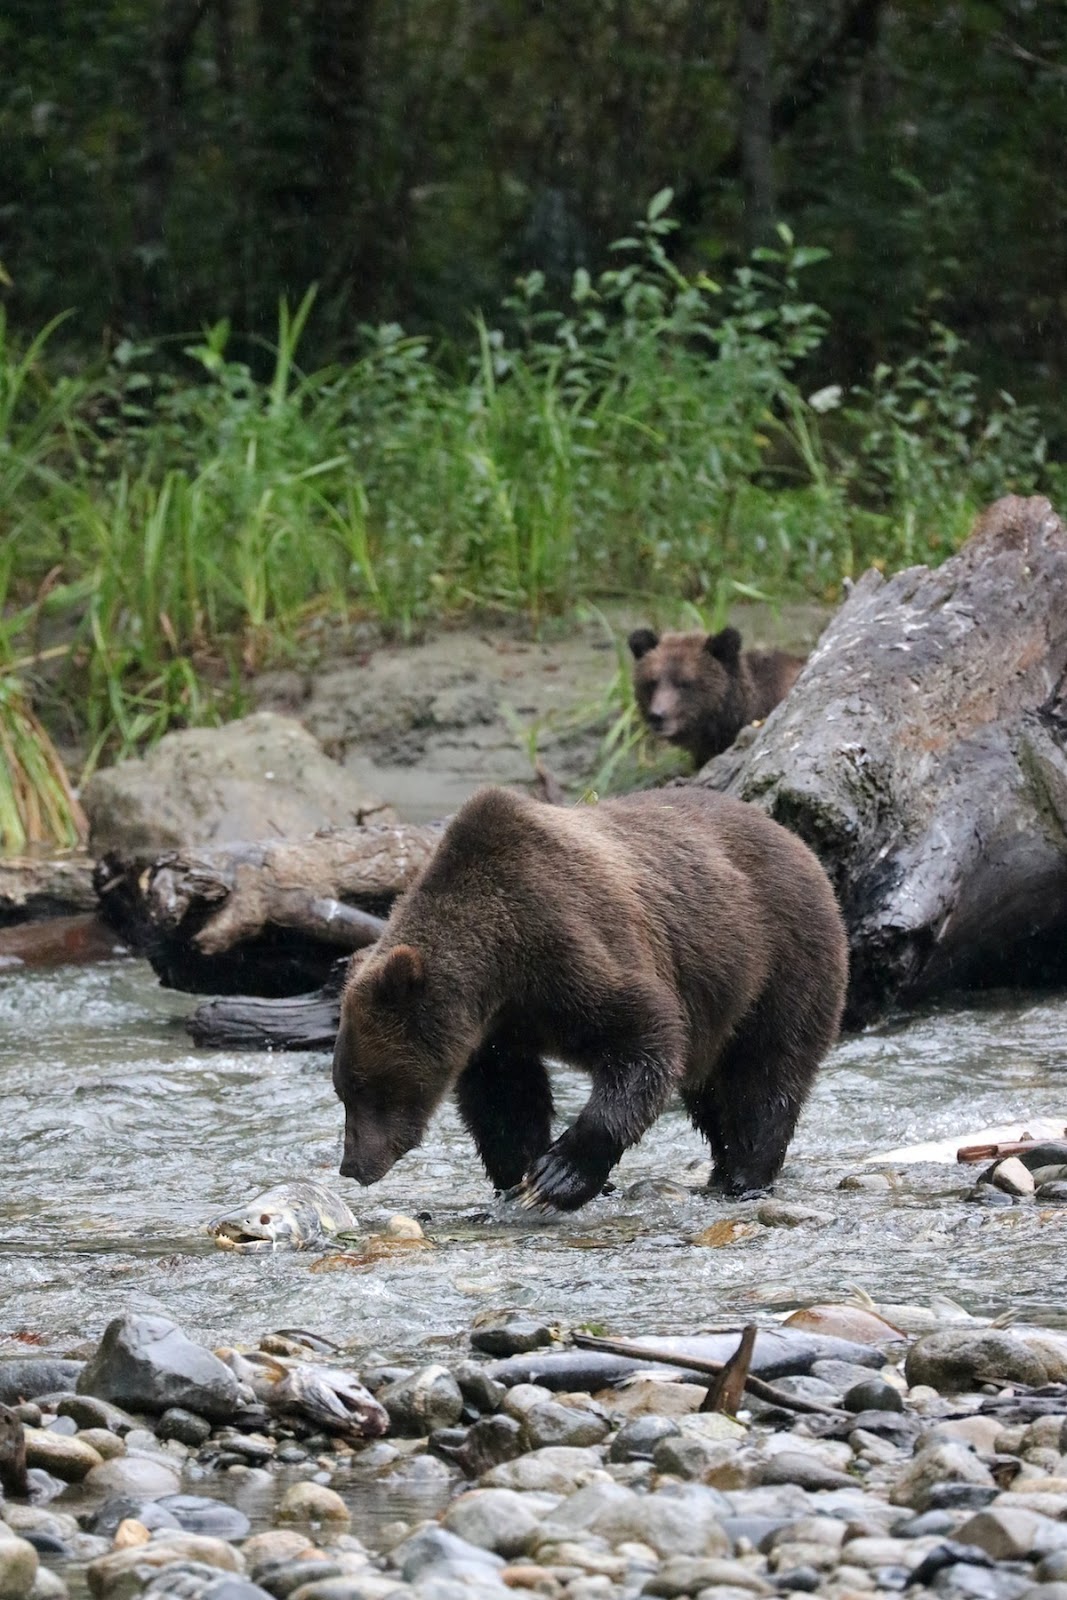 Homalco Wildlife Tours Grizzly bear tours british columbia vancouver blogger.